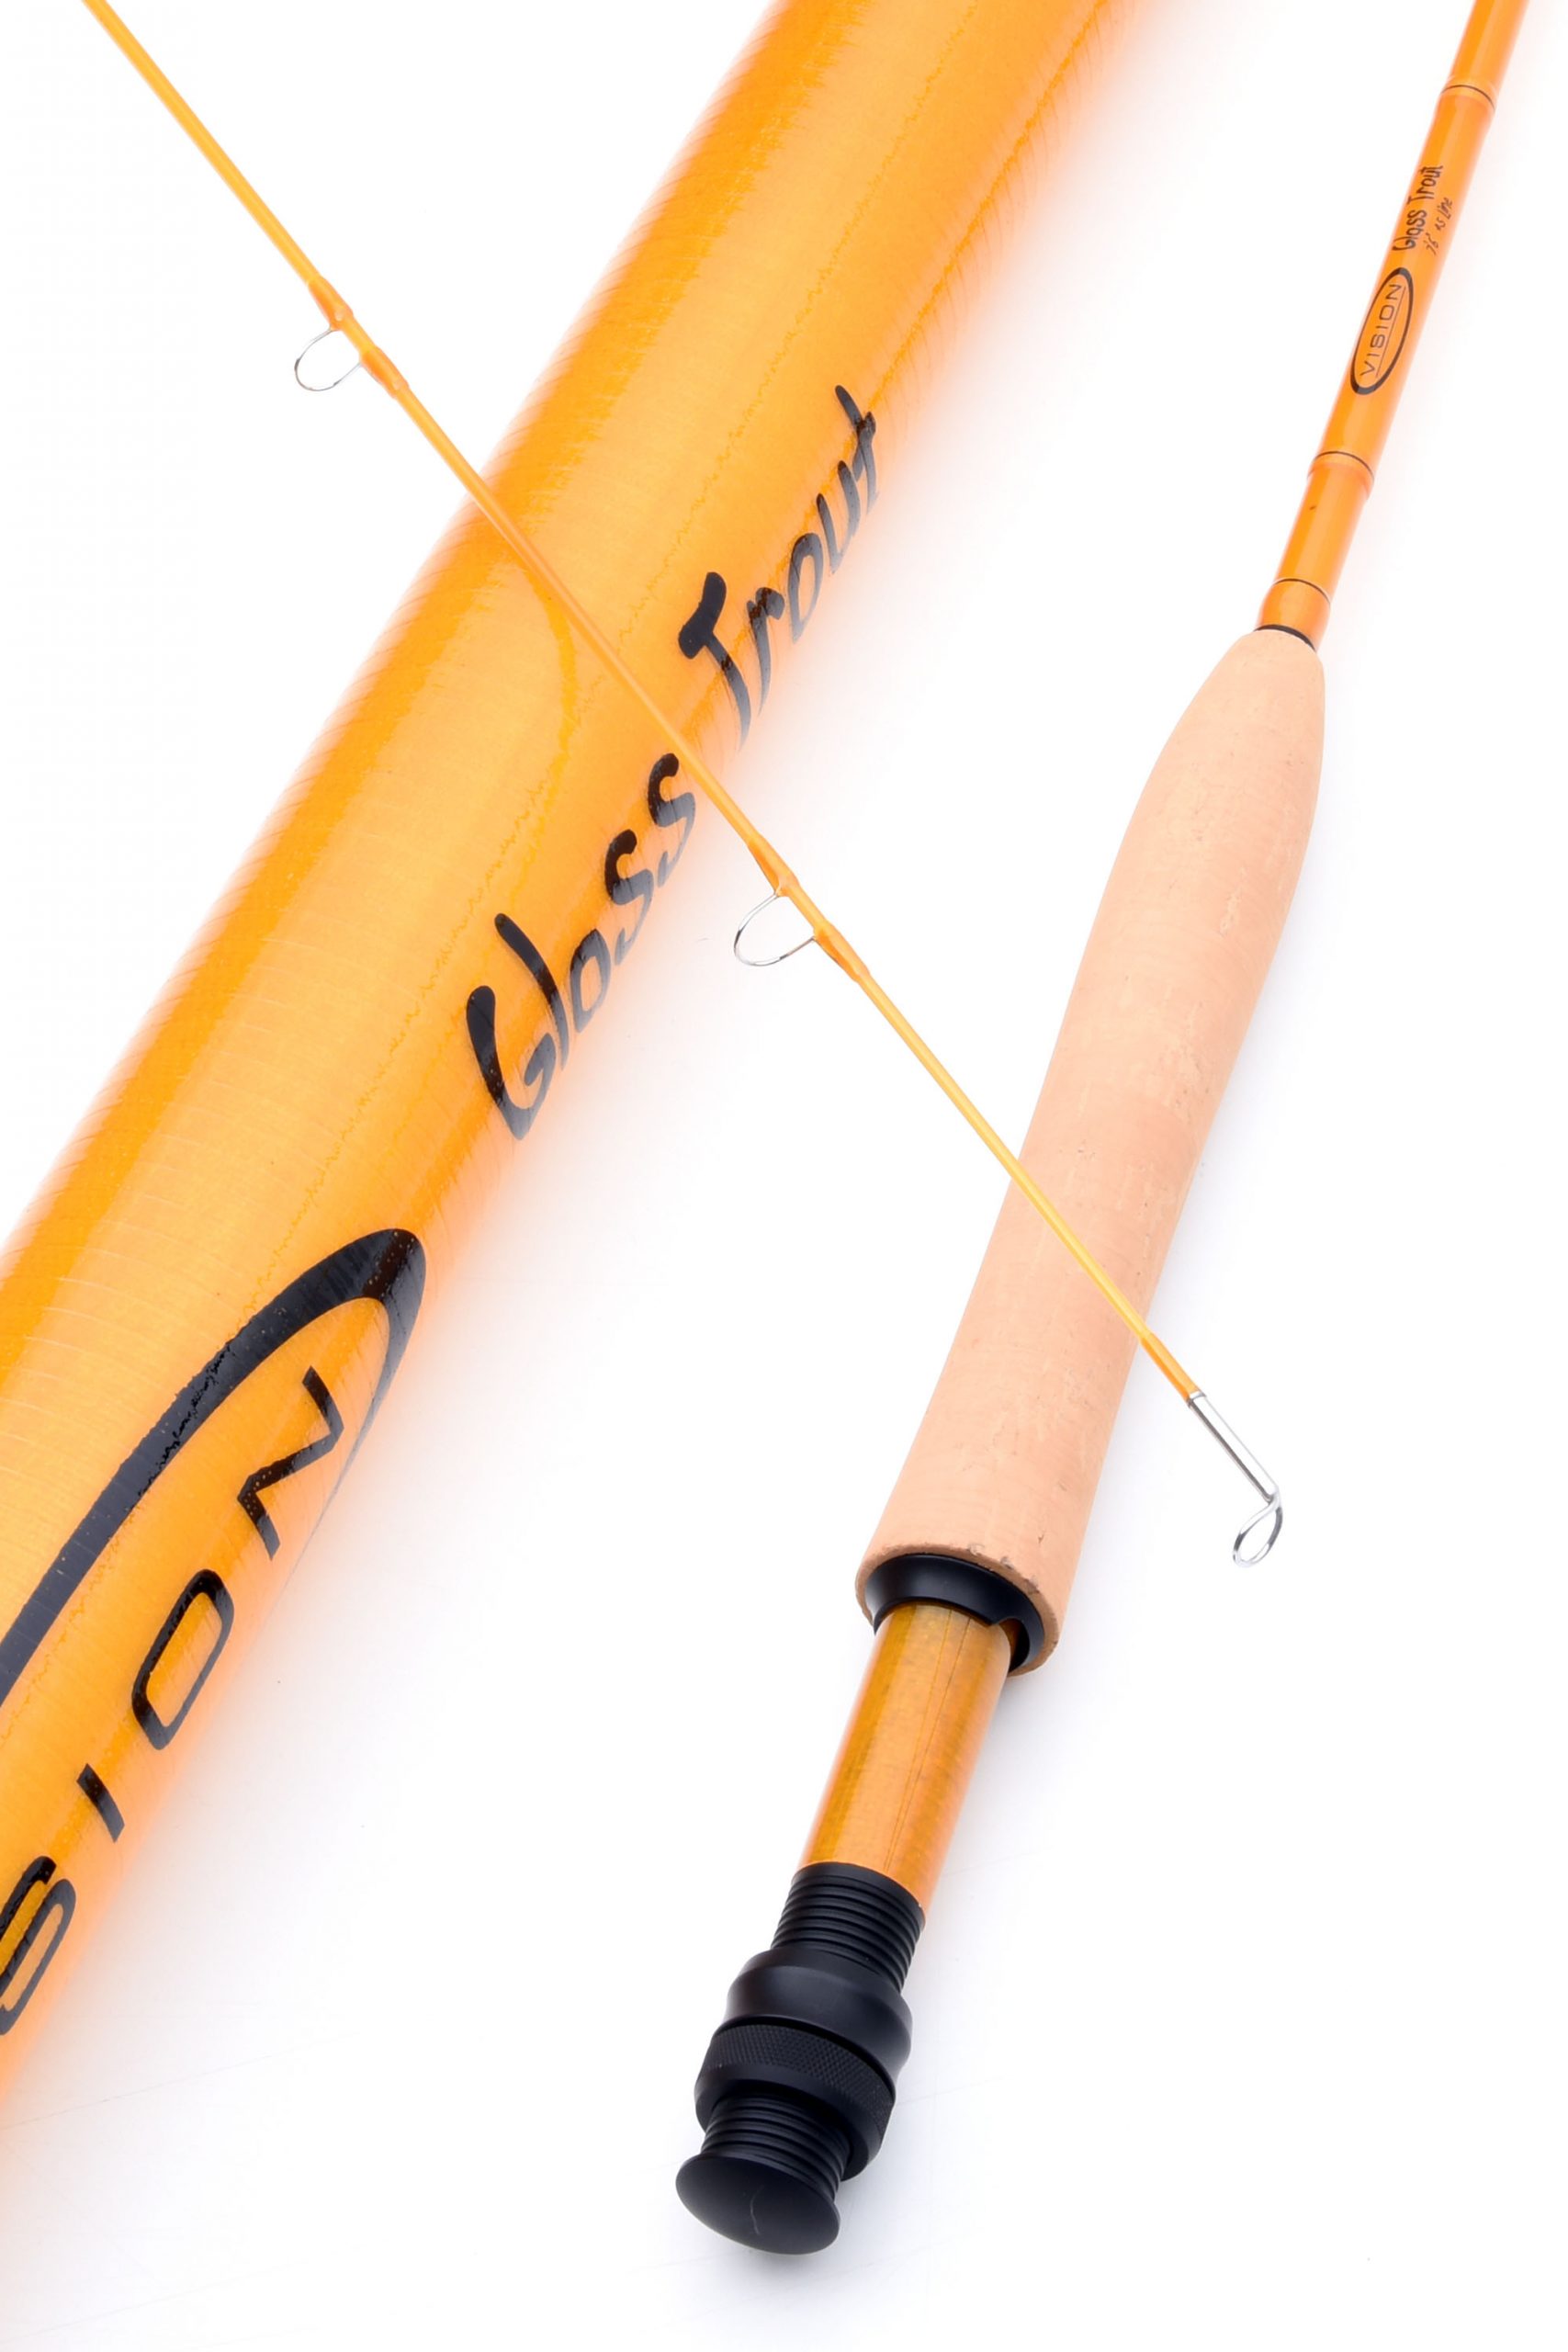 Vision Glass Trout Fly Rod – Guide Flyfishing, Fly Fishing Rods, Reels, Sage, Redington, RIO